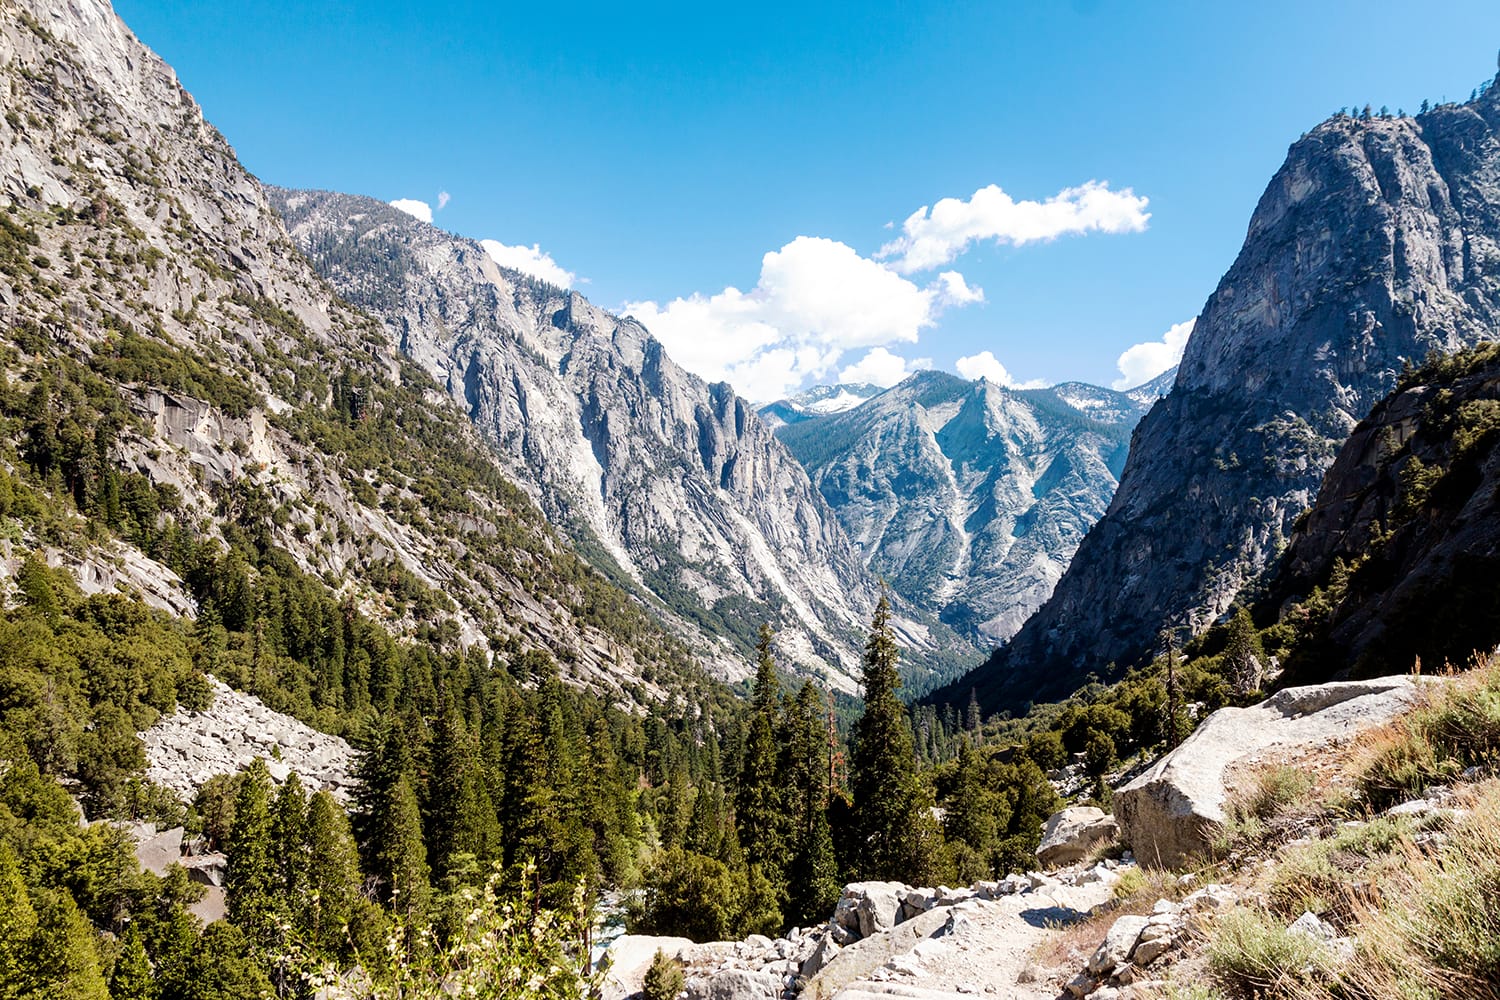 A landscape view of King's Canyon national Park in California.